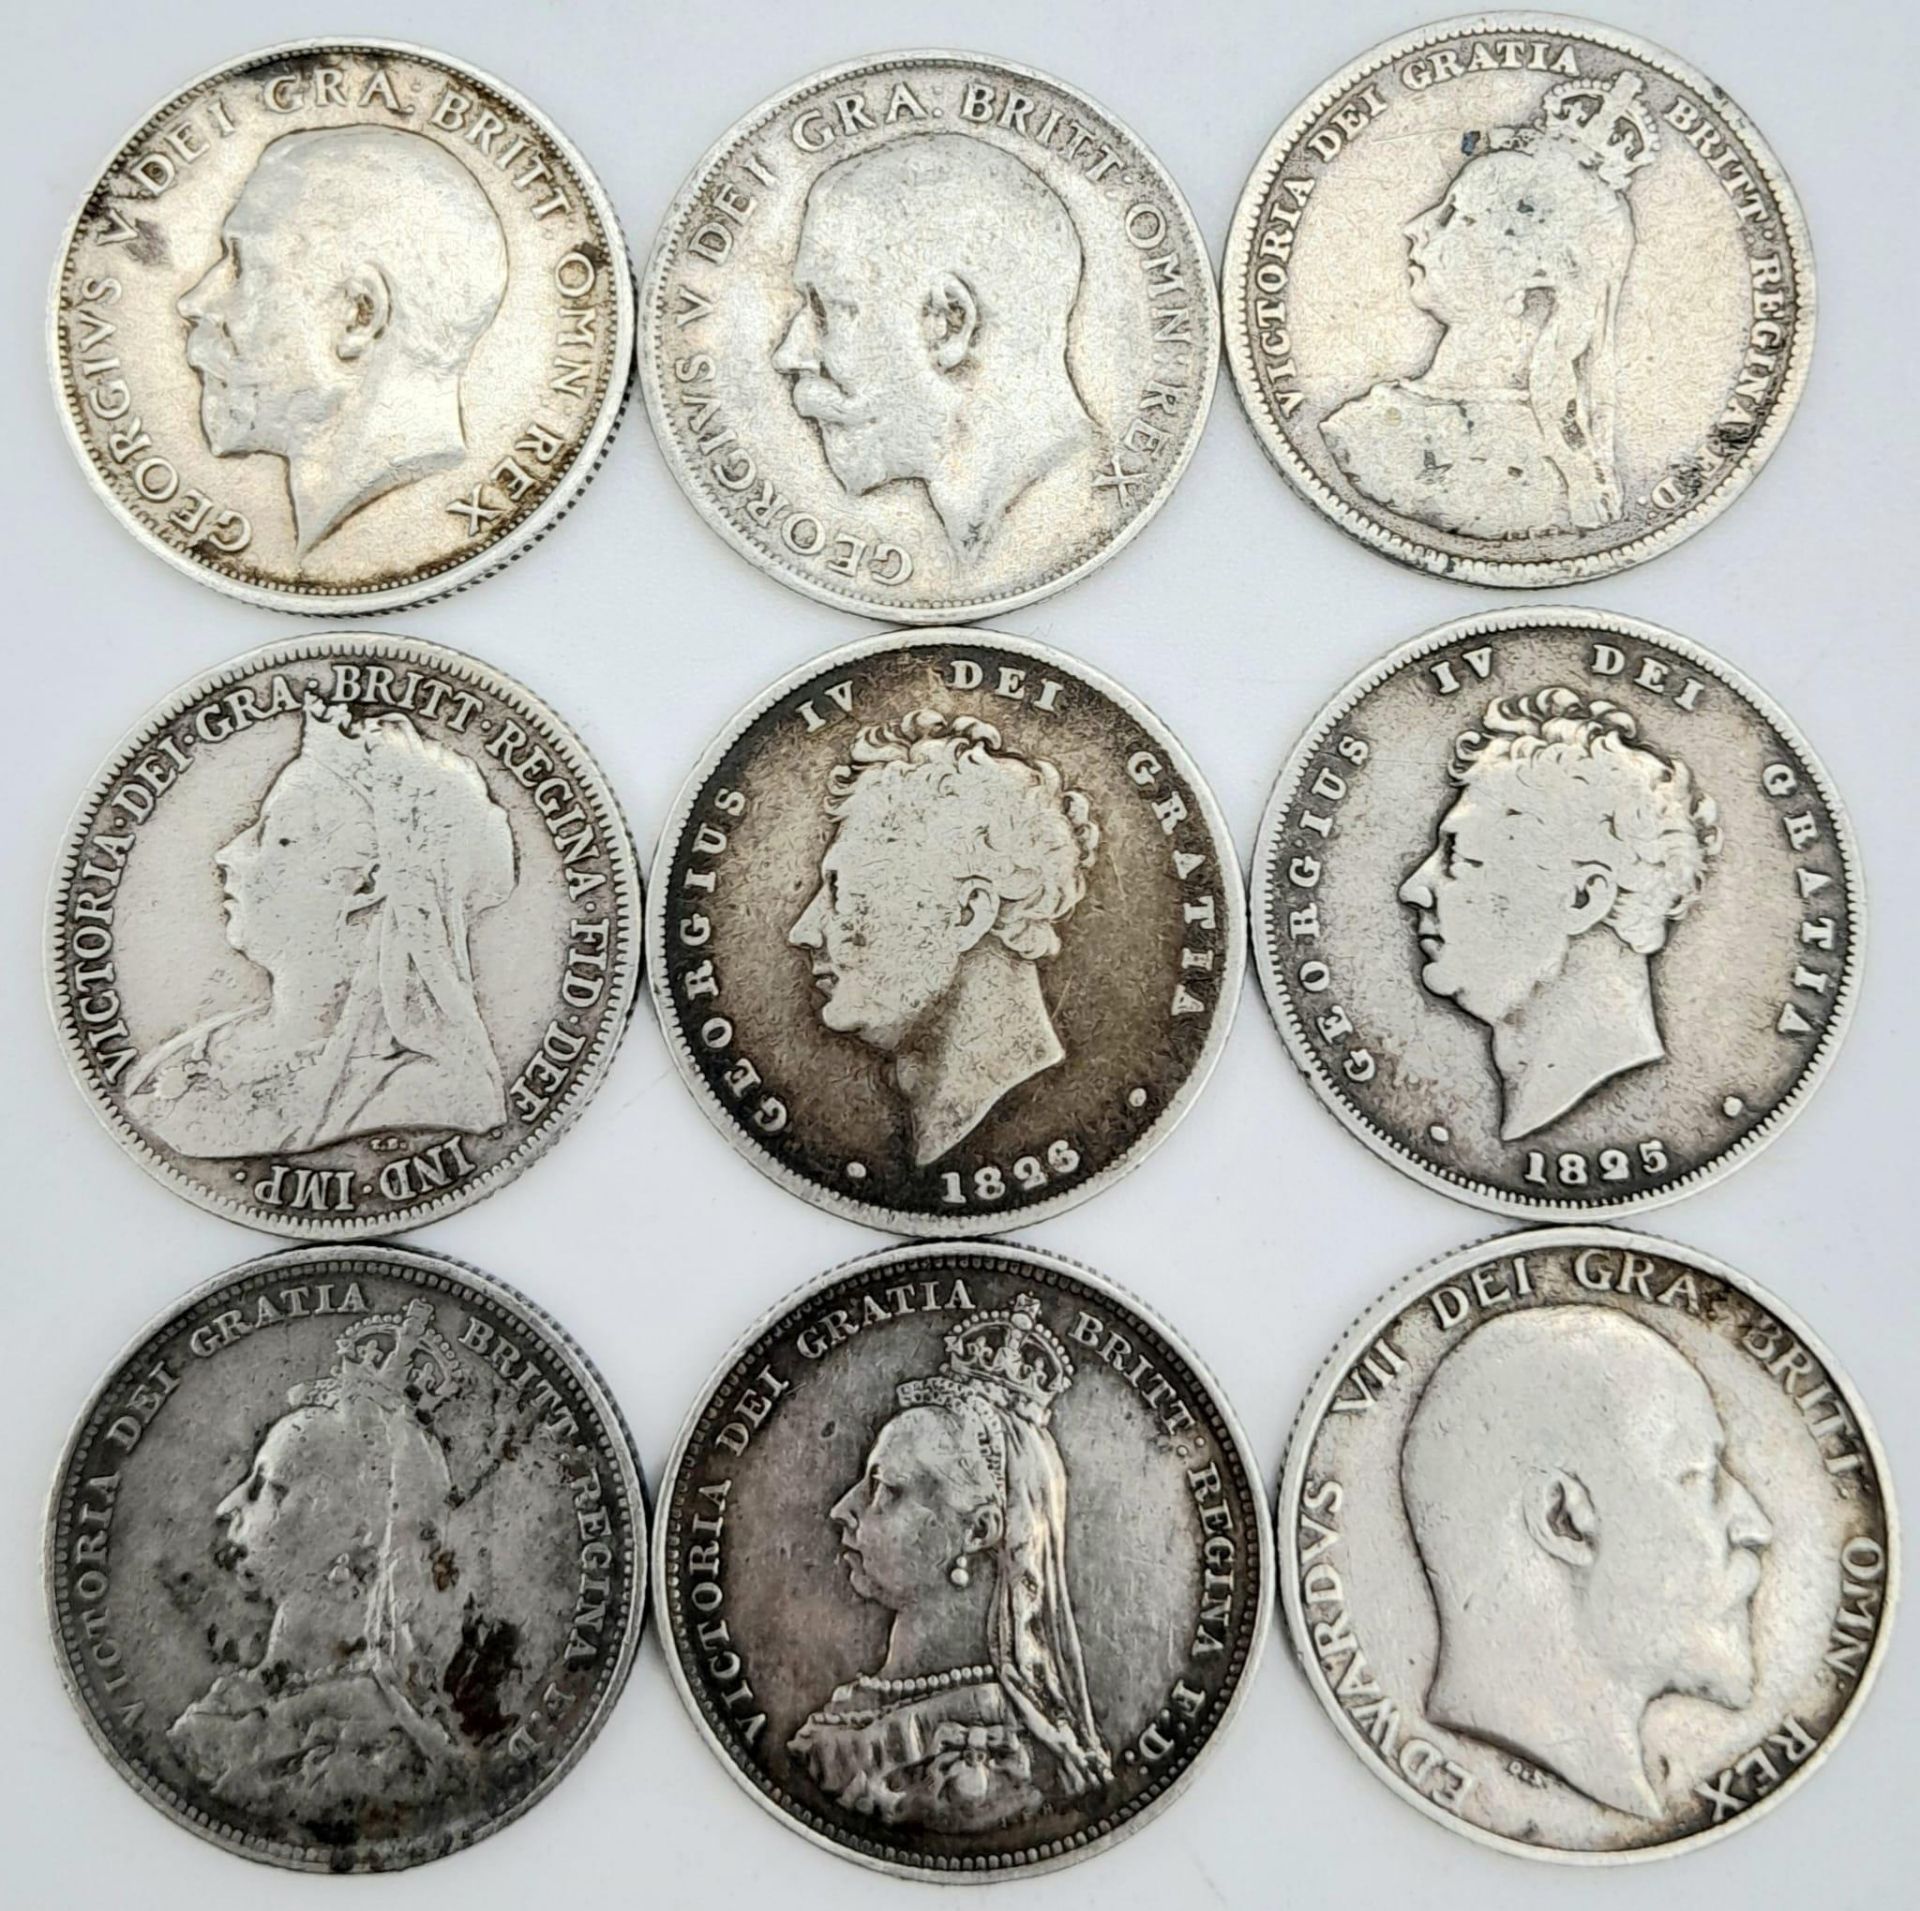 Nine Pre 1920 Silver British Shilling Coins - Please see photos for finer details.